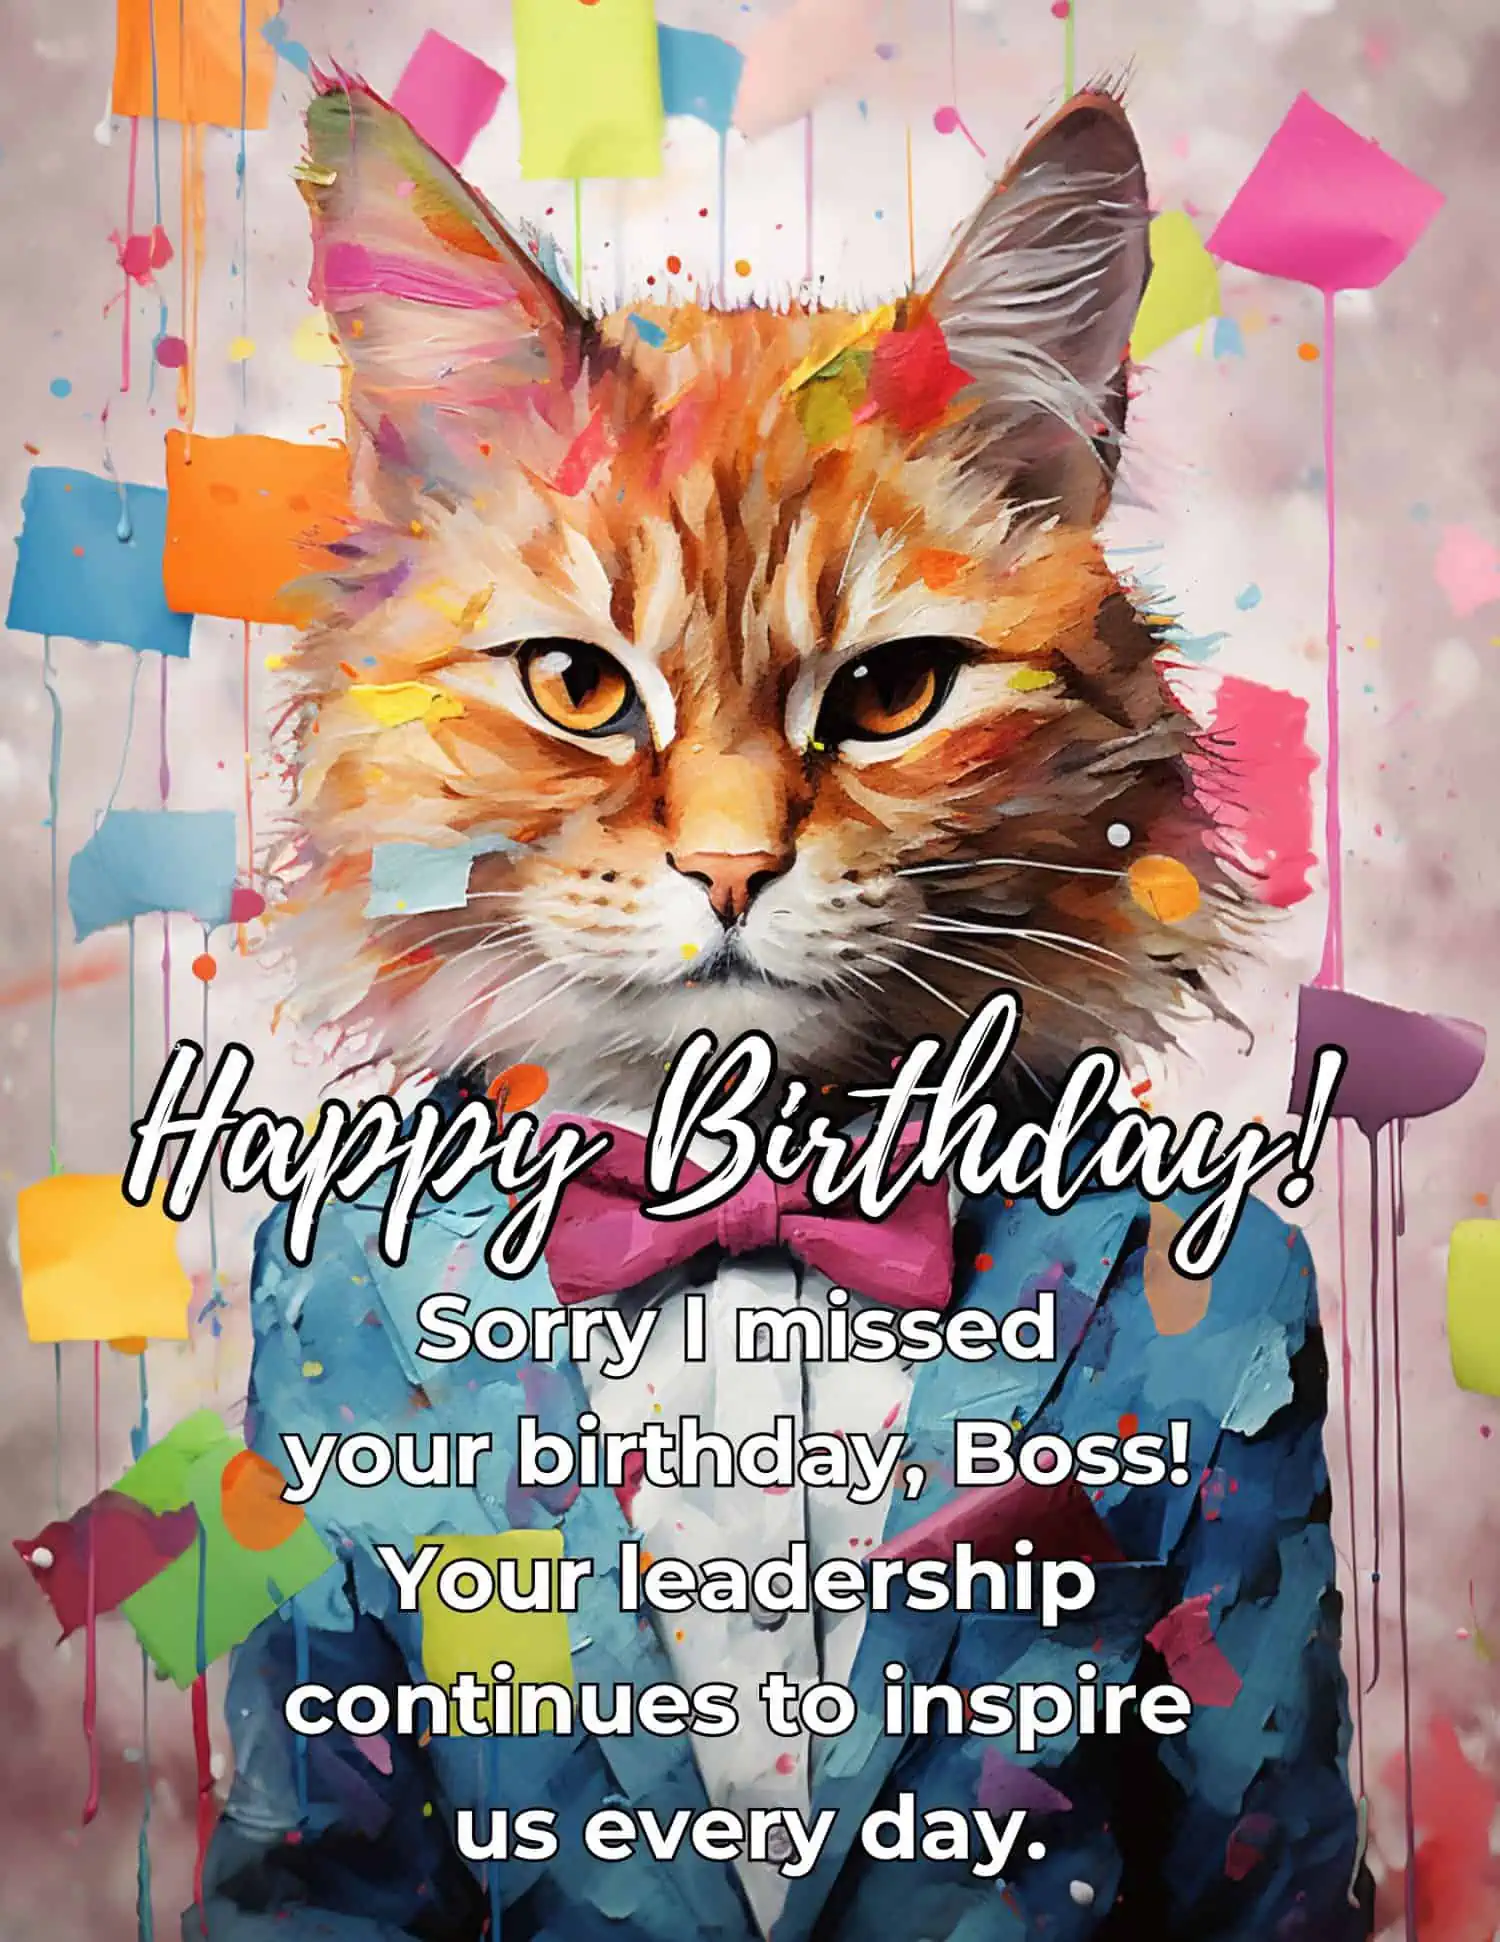 A selection of professional and respectful belated birthday wishes tailored for bosses, perfect for maintaining a positive rapport and showing appreciation, even after the birthday has passed.